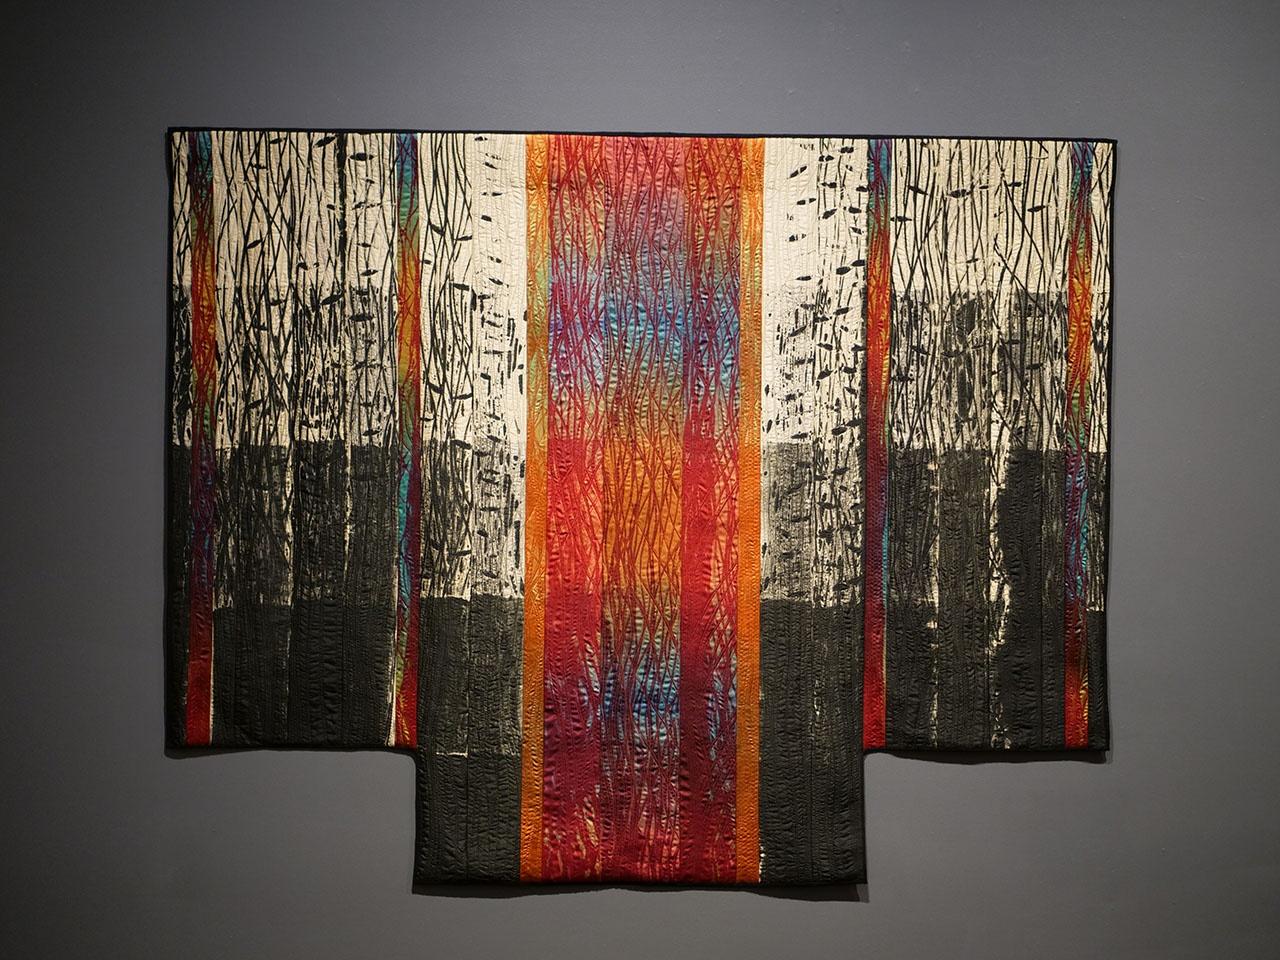 Judith Content, Labyrinth, 2015, Quilts, Craft in America